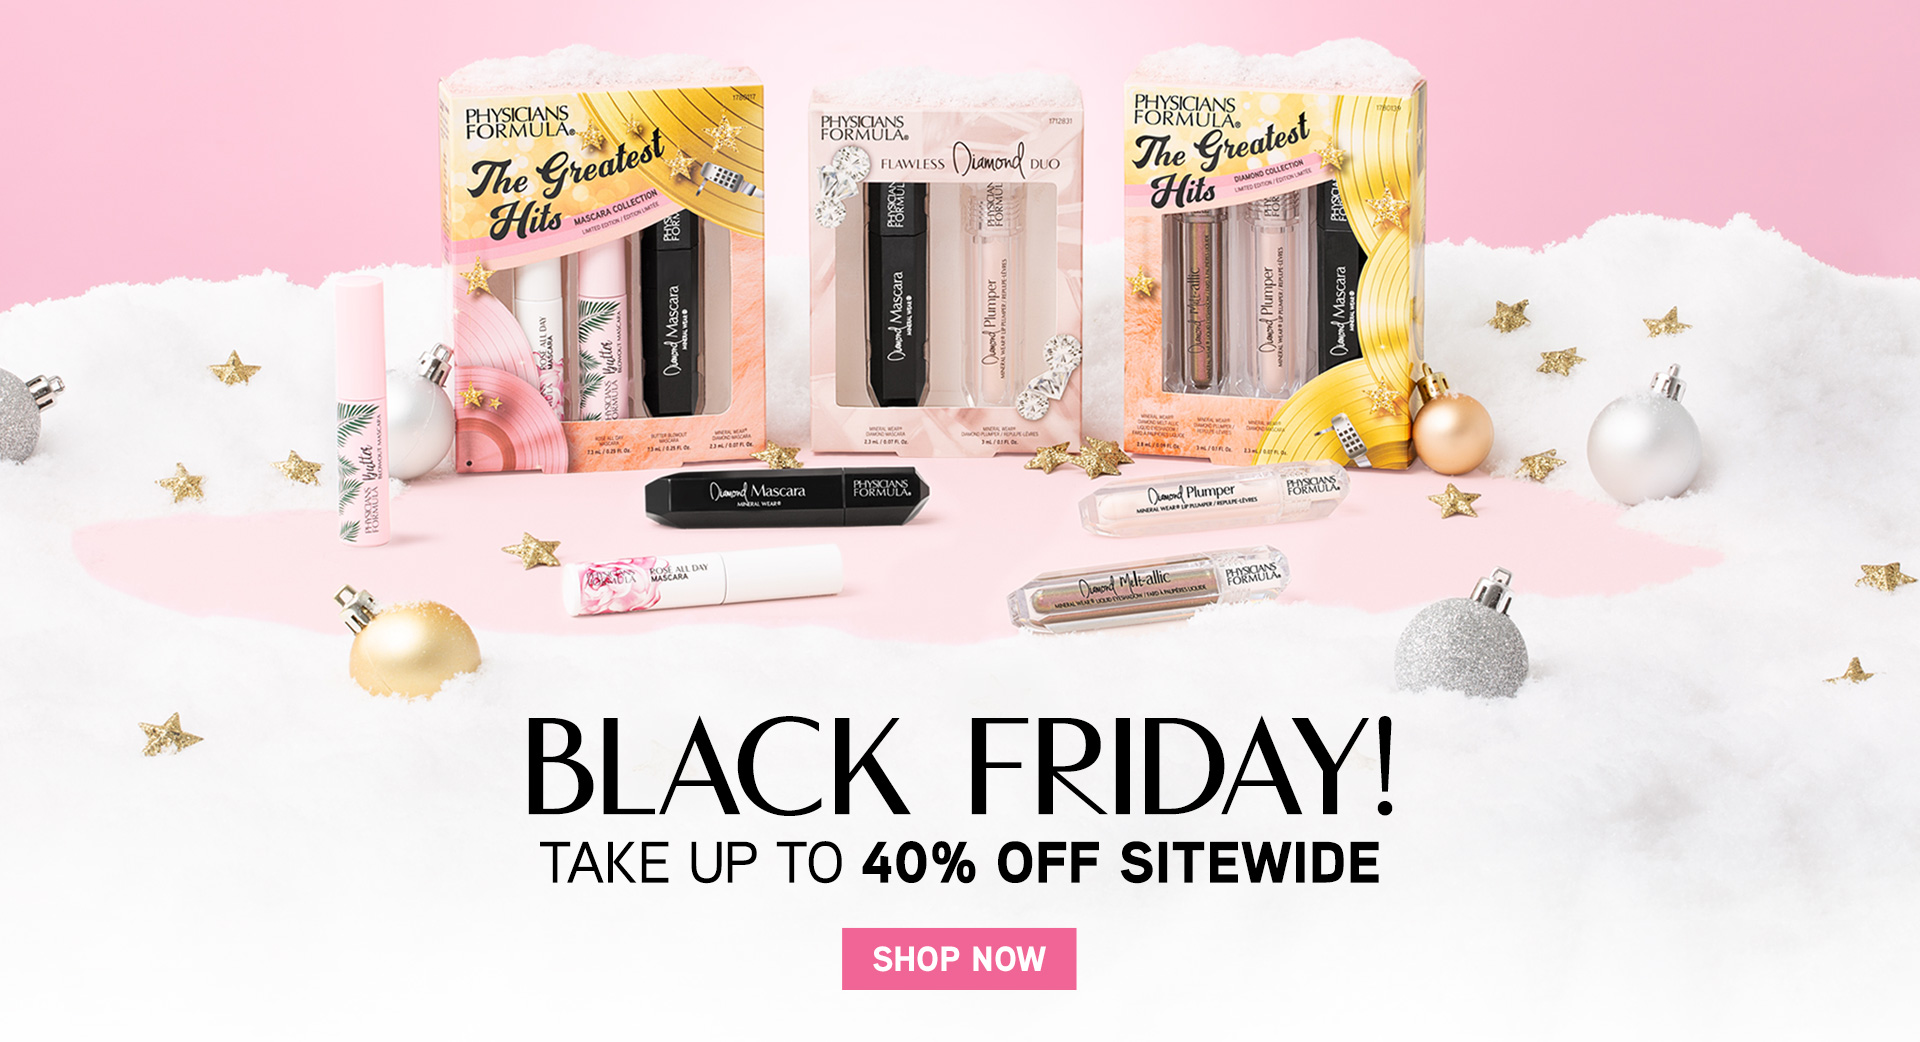 Black Friday! Take up to 40% Off Sitewide